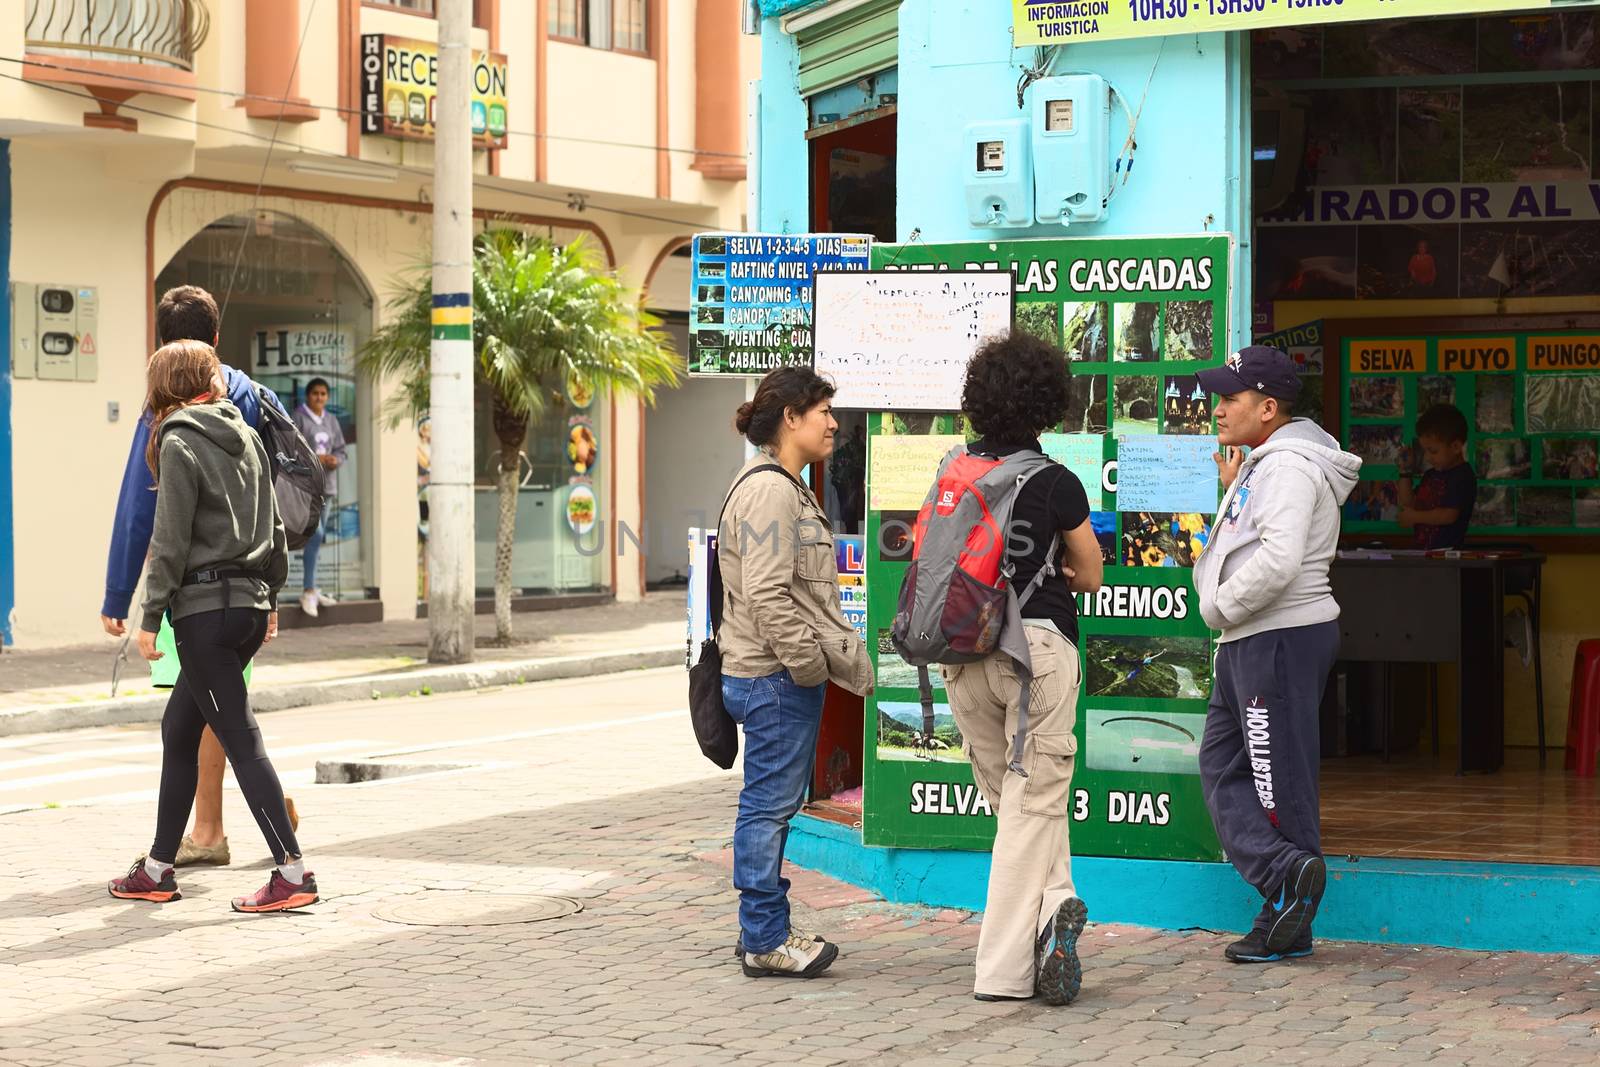 BANOS, ECUADOR - FEBRUARY 25, 2014: Unidentified people in front of the tour operator Tungurahua Explorer on the corner of the streets 16 de Diciembre and Vicente Rocafuerte on February 25, 2014 in Banos, Ecuador. Banos is a small touristy town, mainly visited for its numerous outdoor activities and adventure tours, which are being offered by many tour operators all over town.